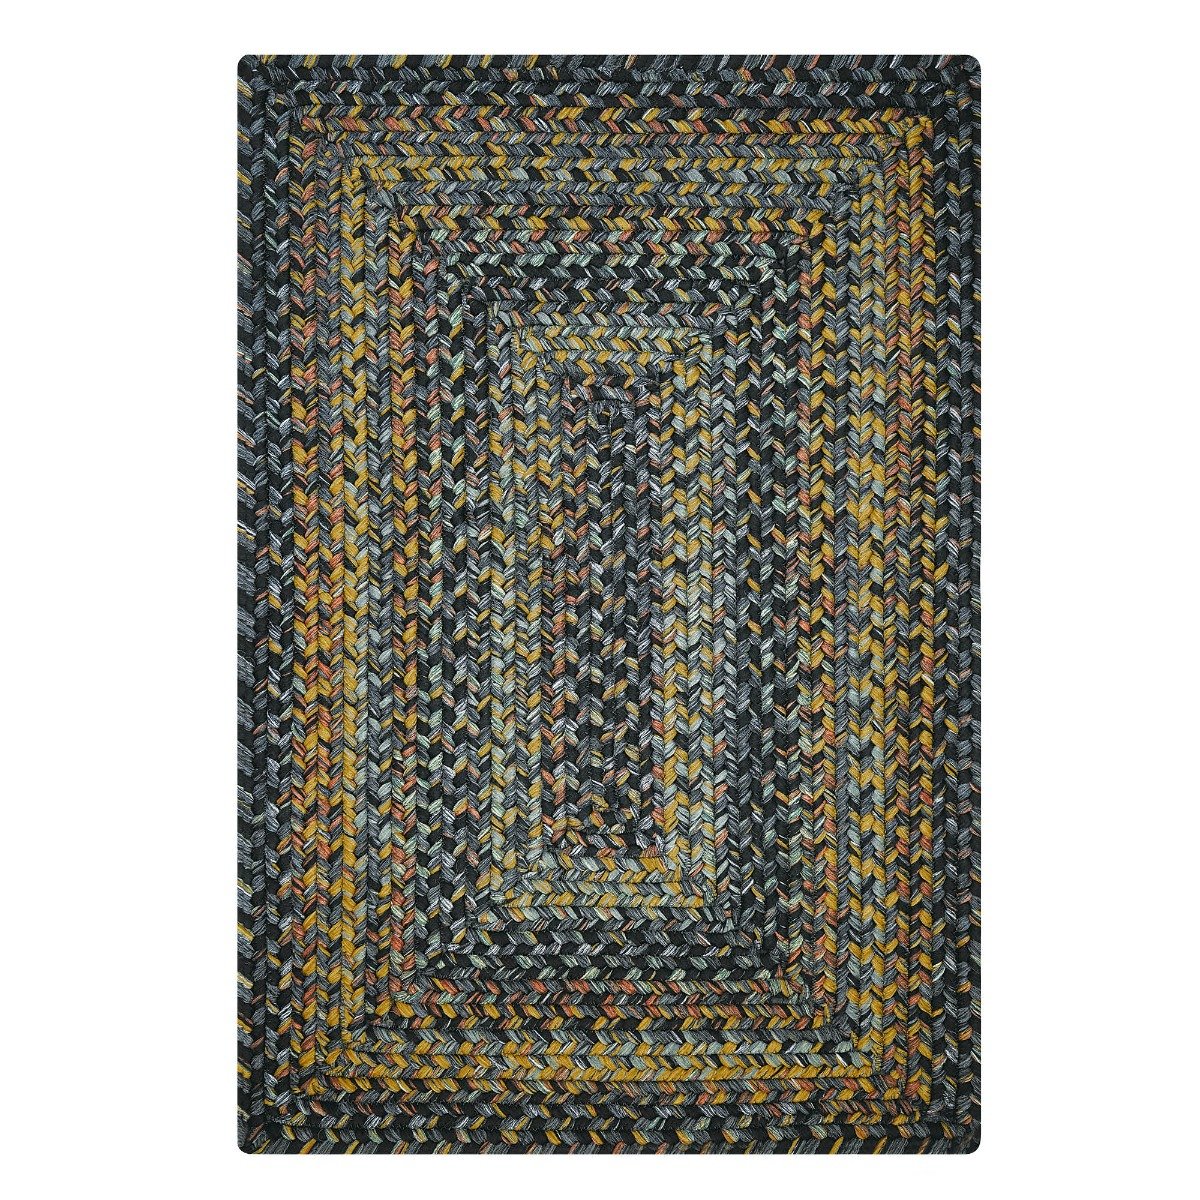 Buy online Homespice Decor Black Forest Indoor/outdoor Braided Rectangle  Rug from Rugs & Carpets for Unisex by Homespice for ₹1525 at 12% off